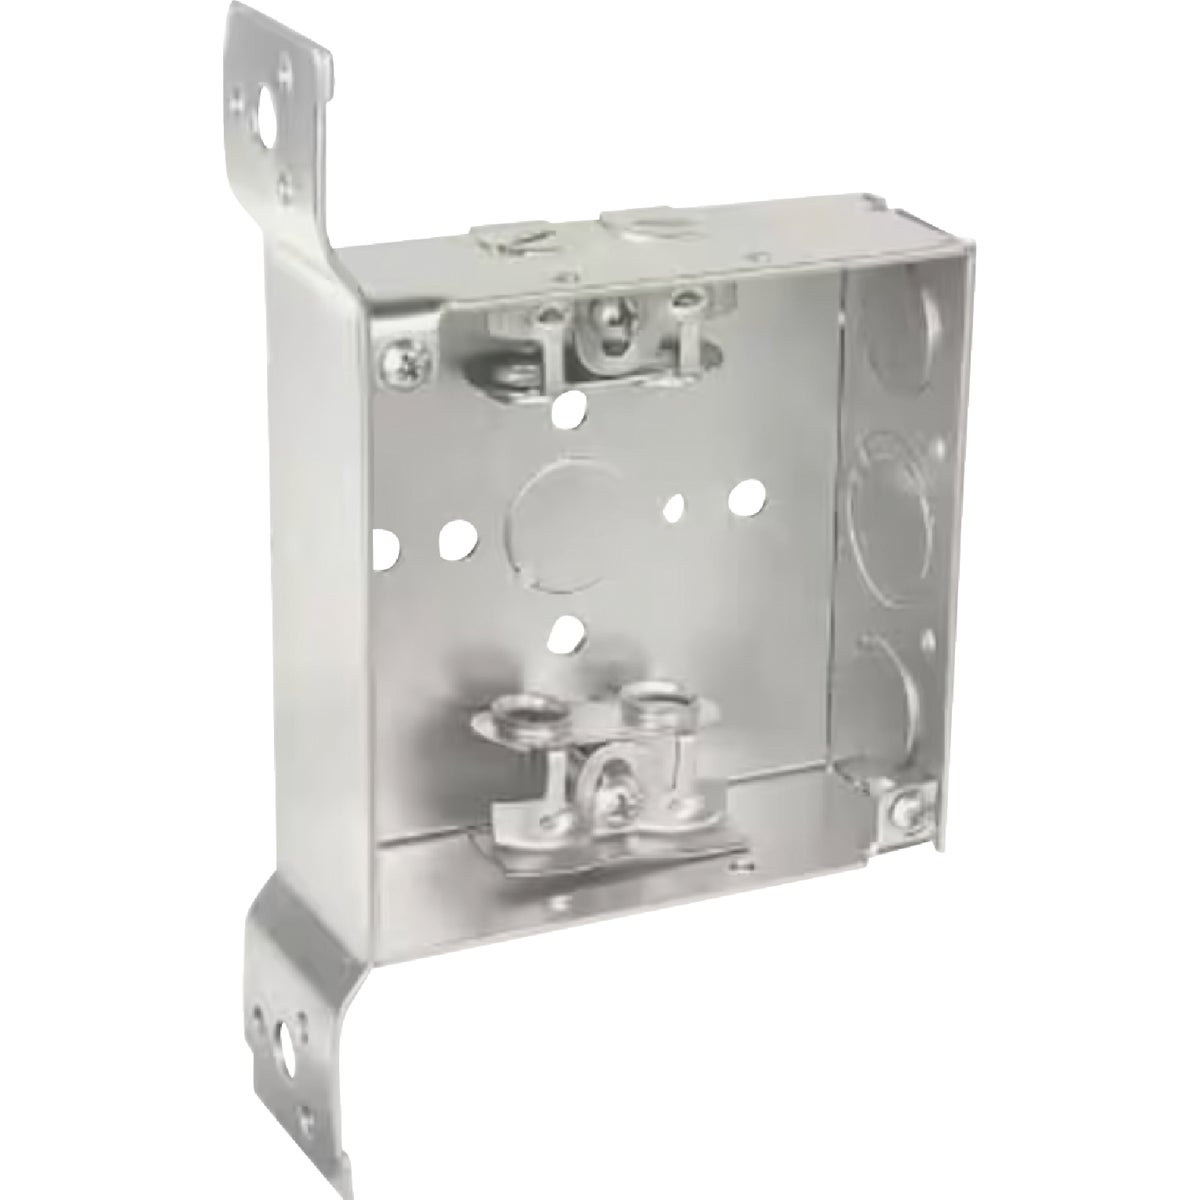 Item 553913, Square bracketed box used to distribute power to a number of electrical 